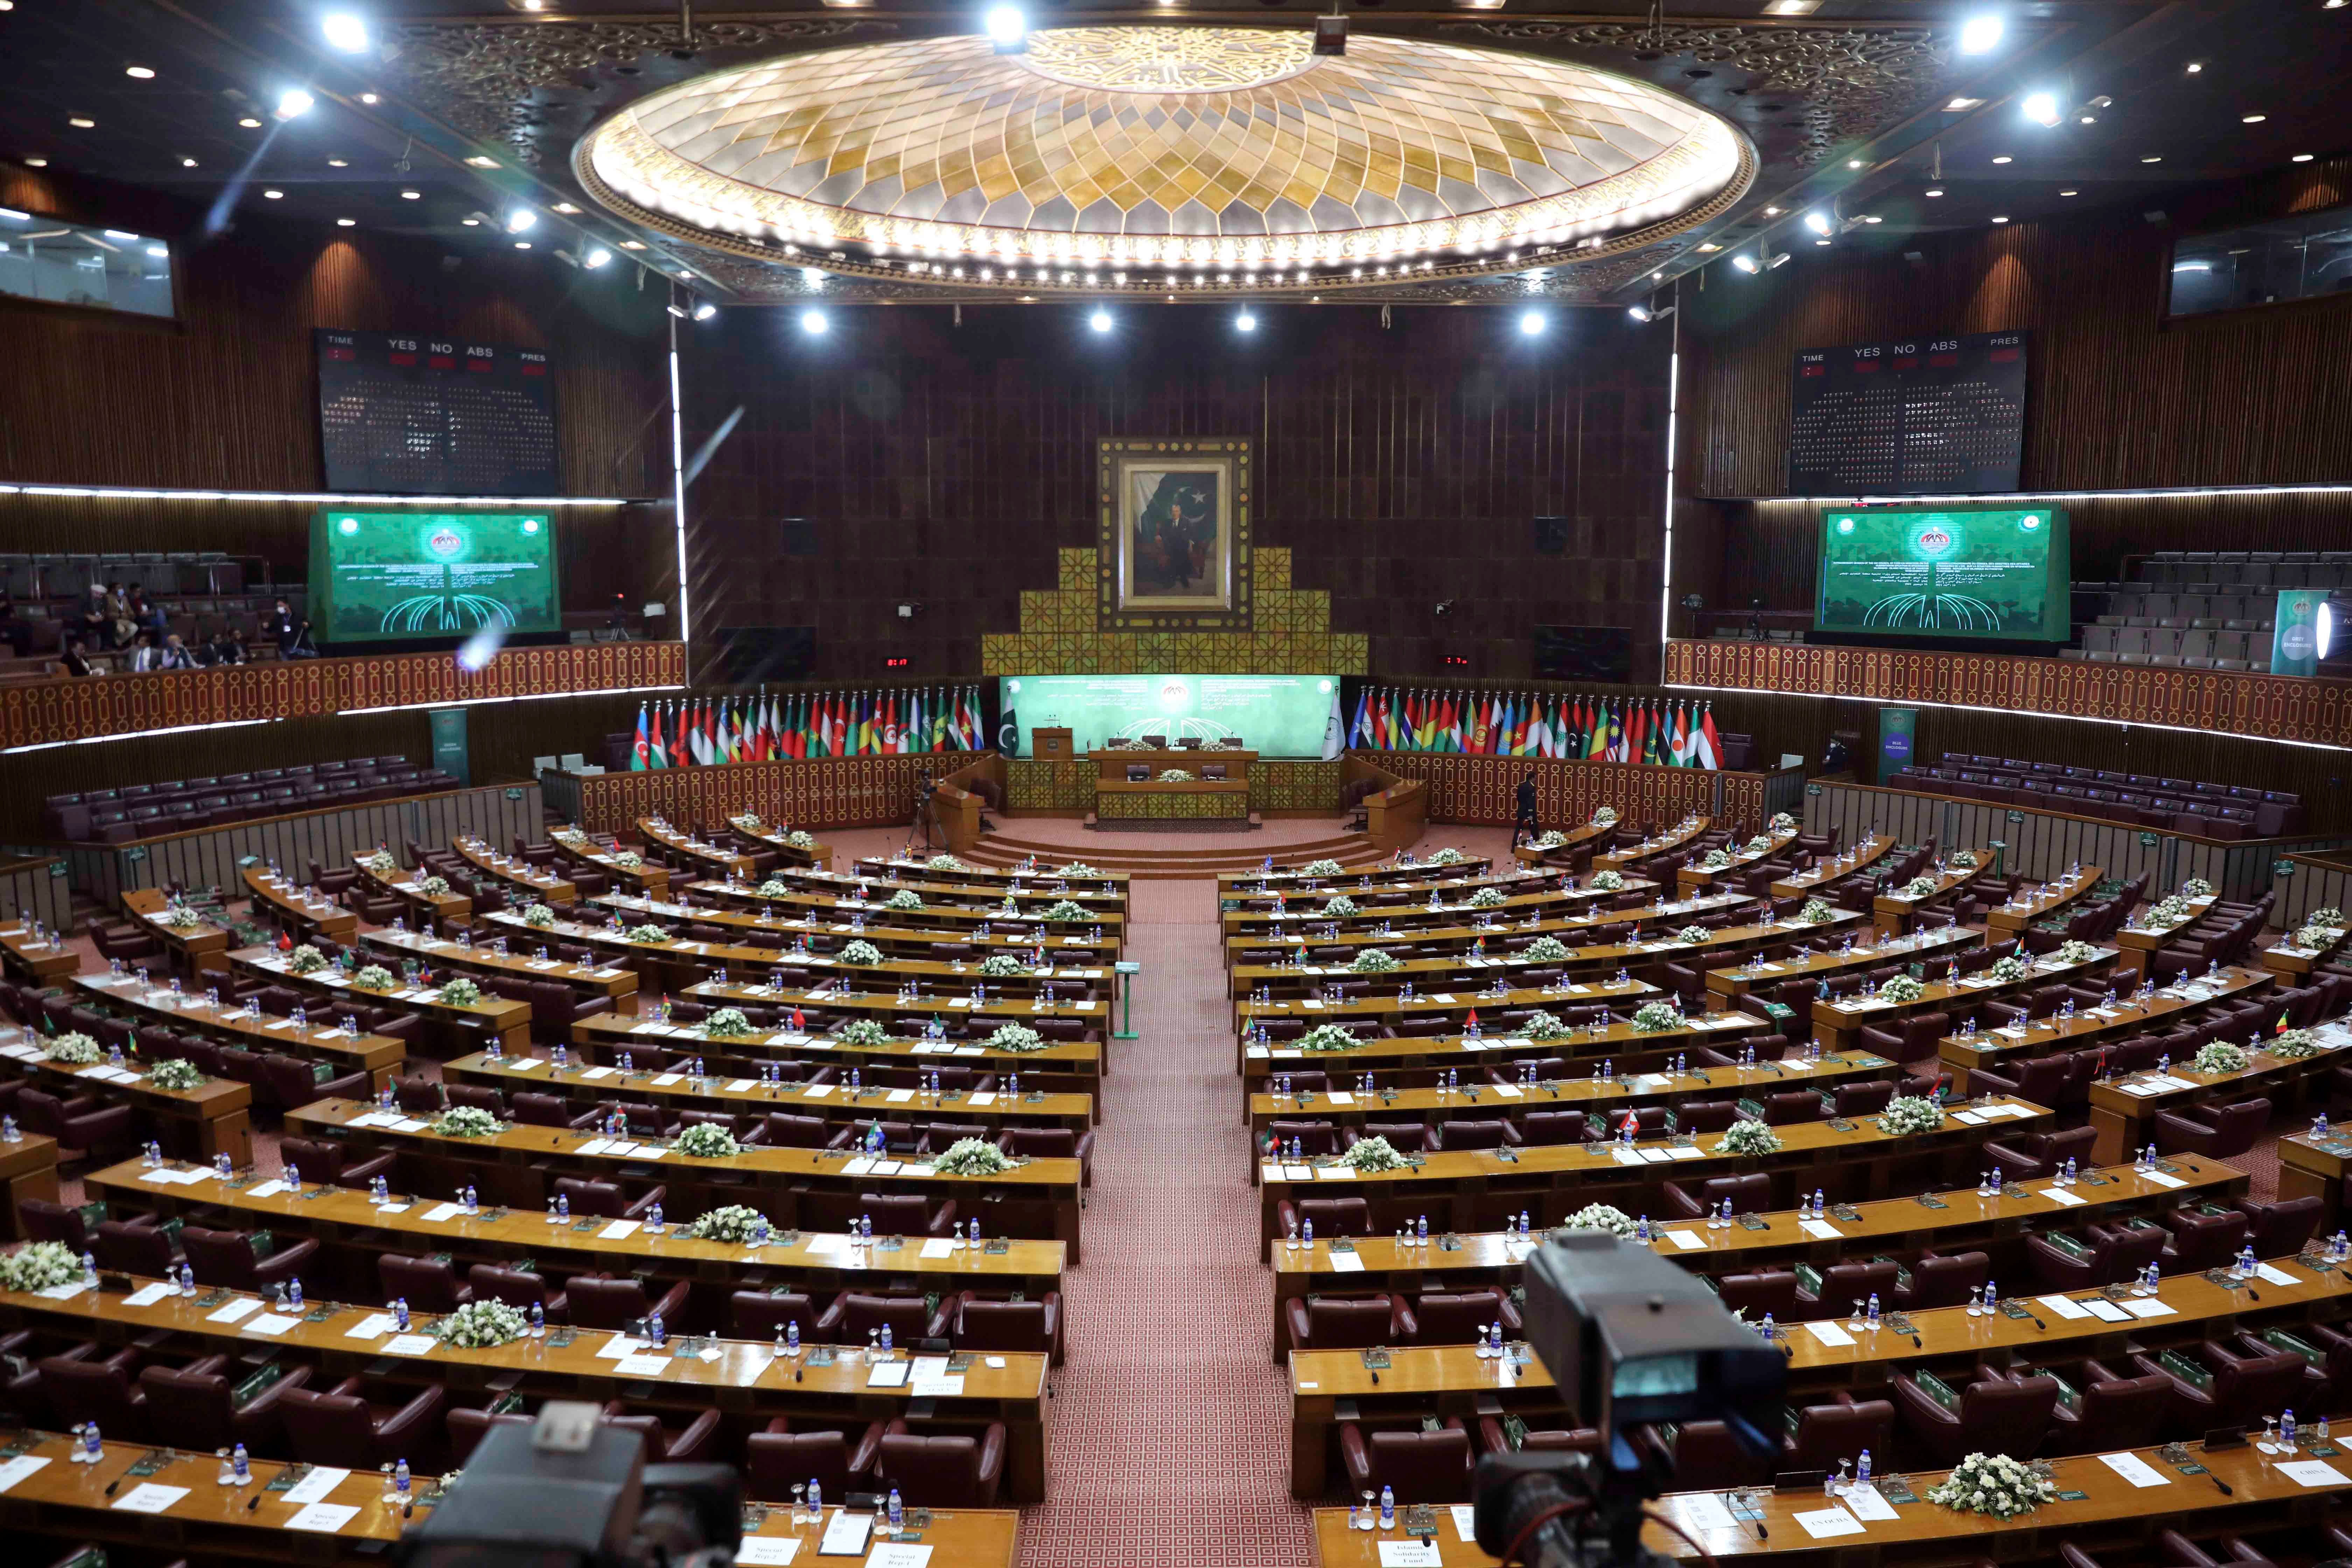 General shot of the Pakistan parliament chamber